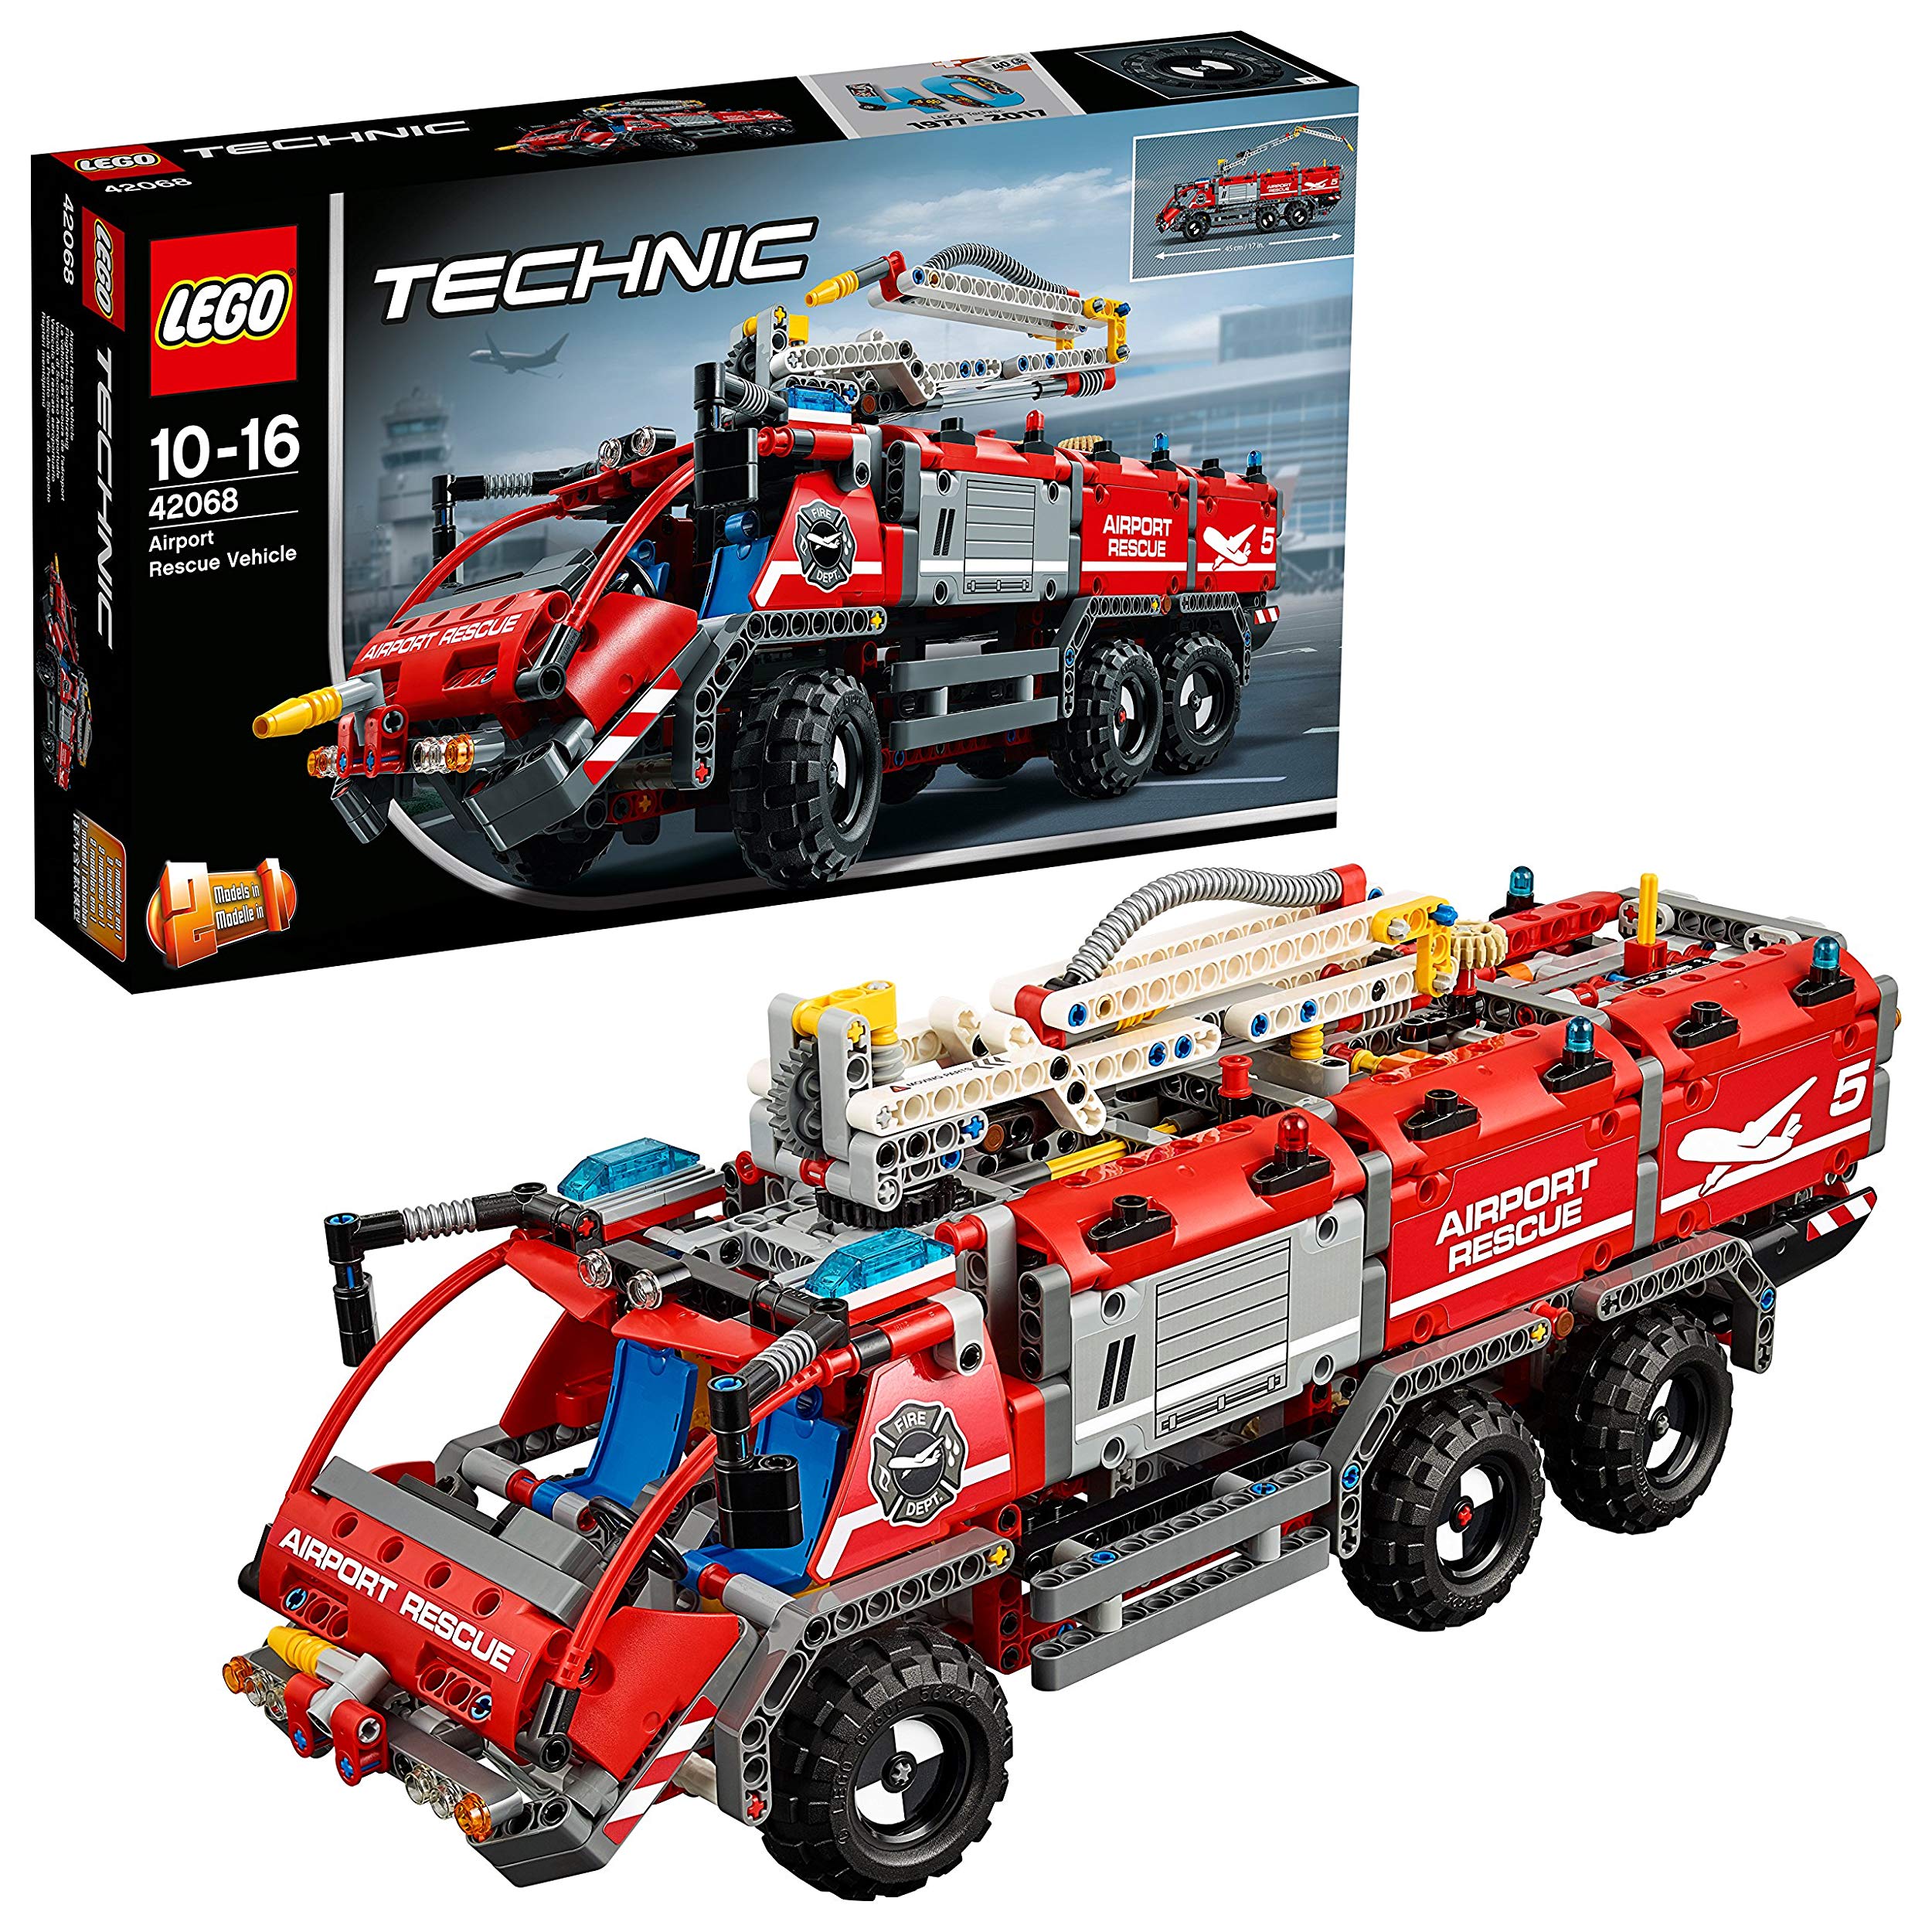 Lego Airport Fire Fighting